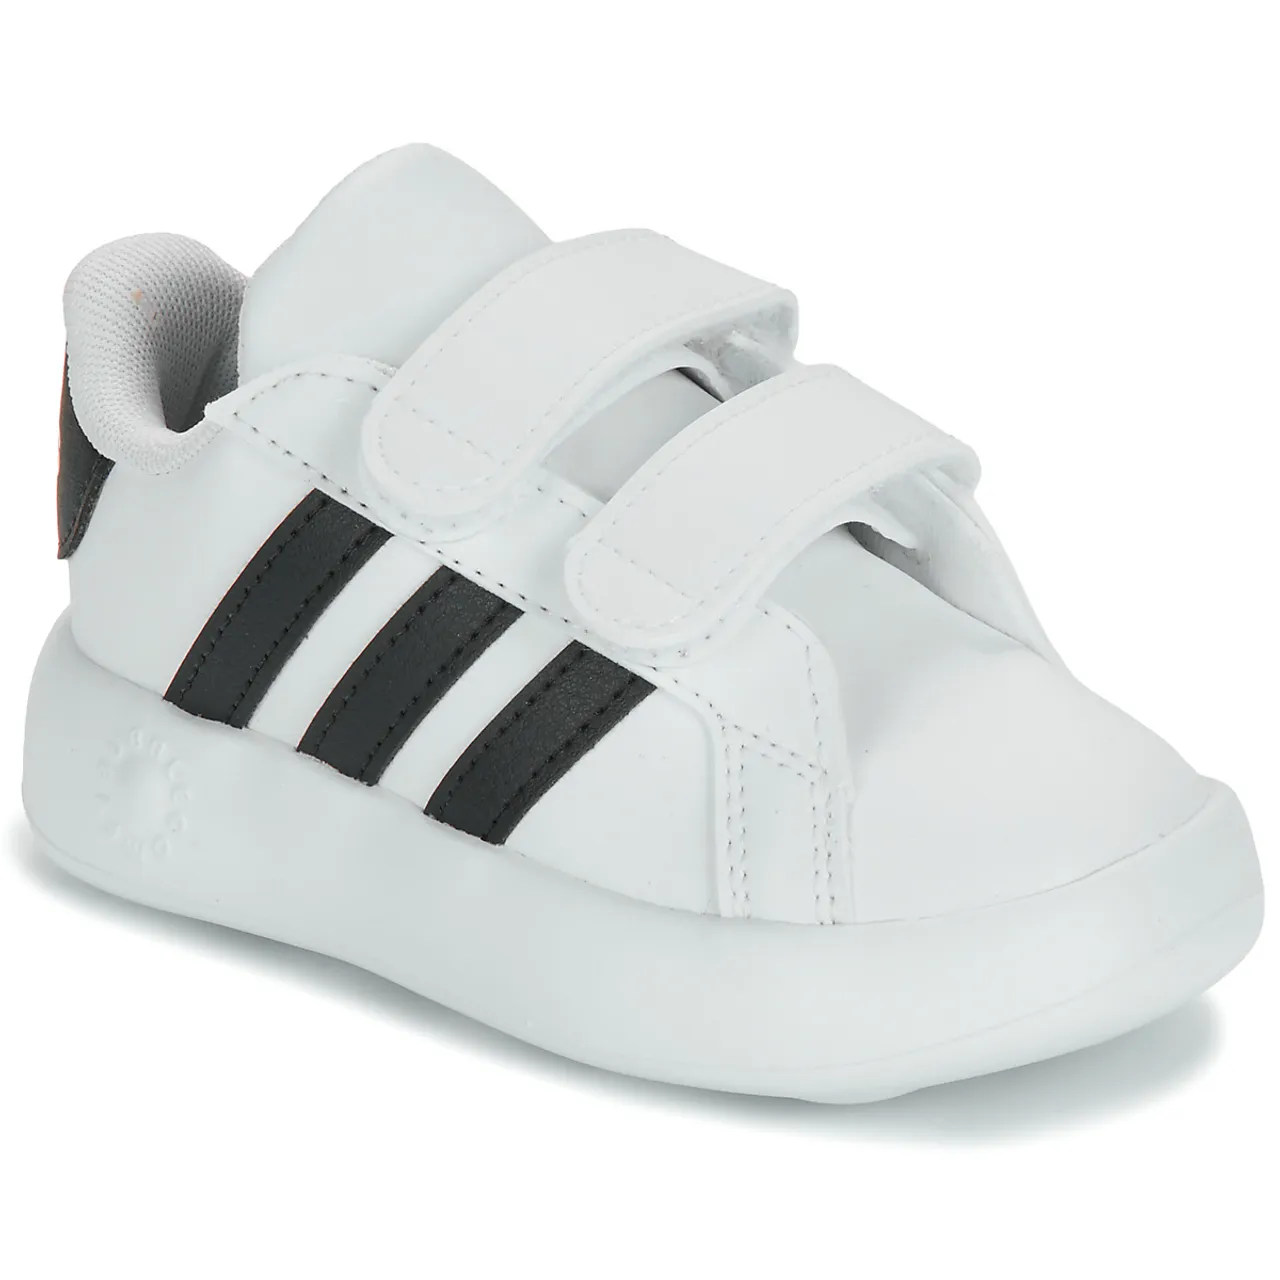 adidas  GRAND COURT 2.0 CF I  boys's Children's Shoes (Trainers) in White